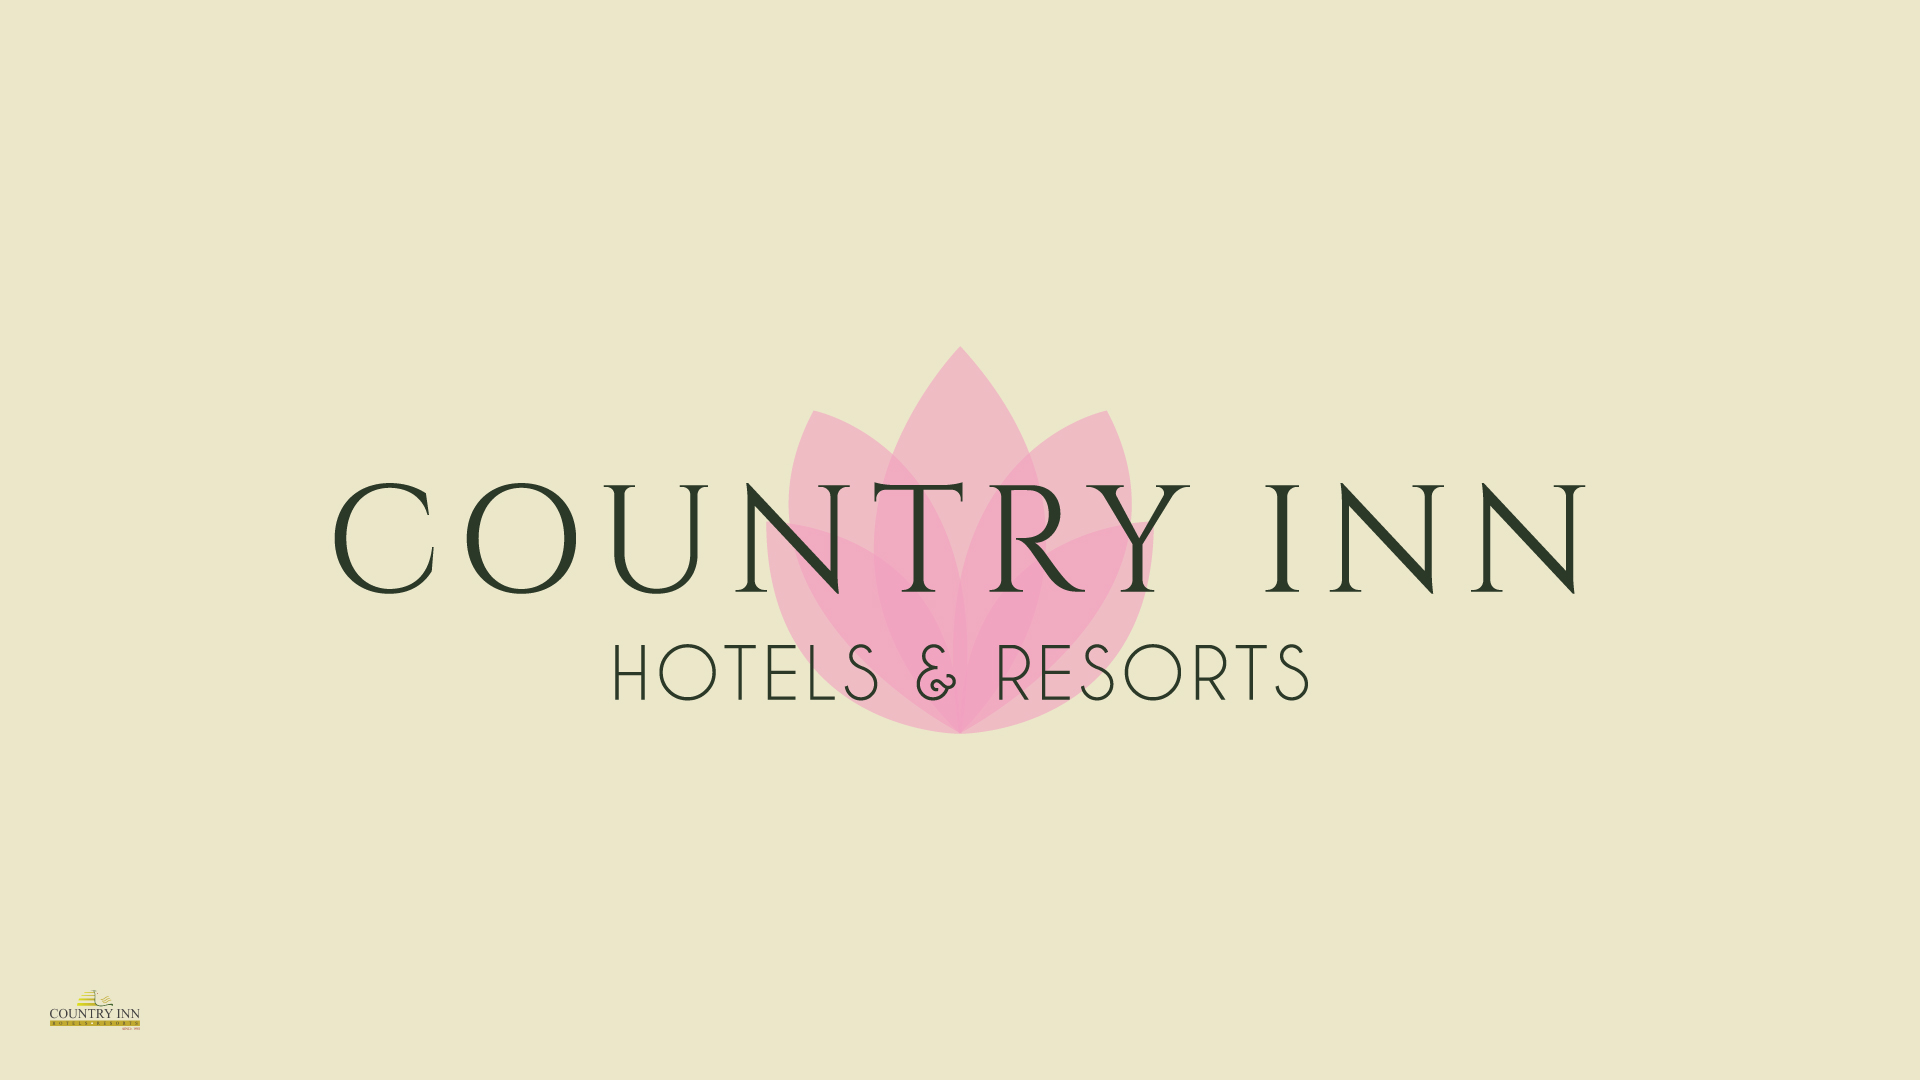 Country Inn Hotels & Resorts introduces refreshed brand identity and plans expansion